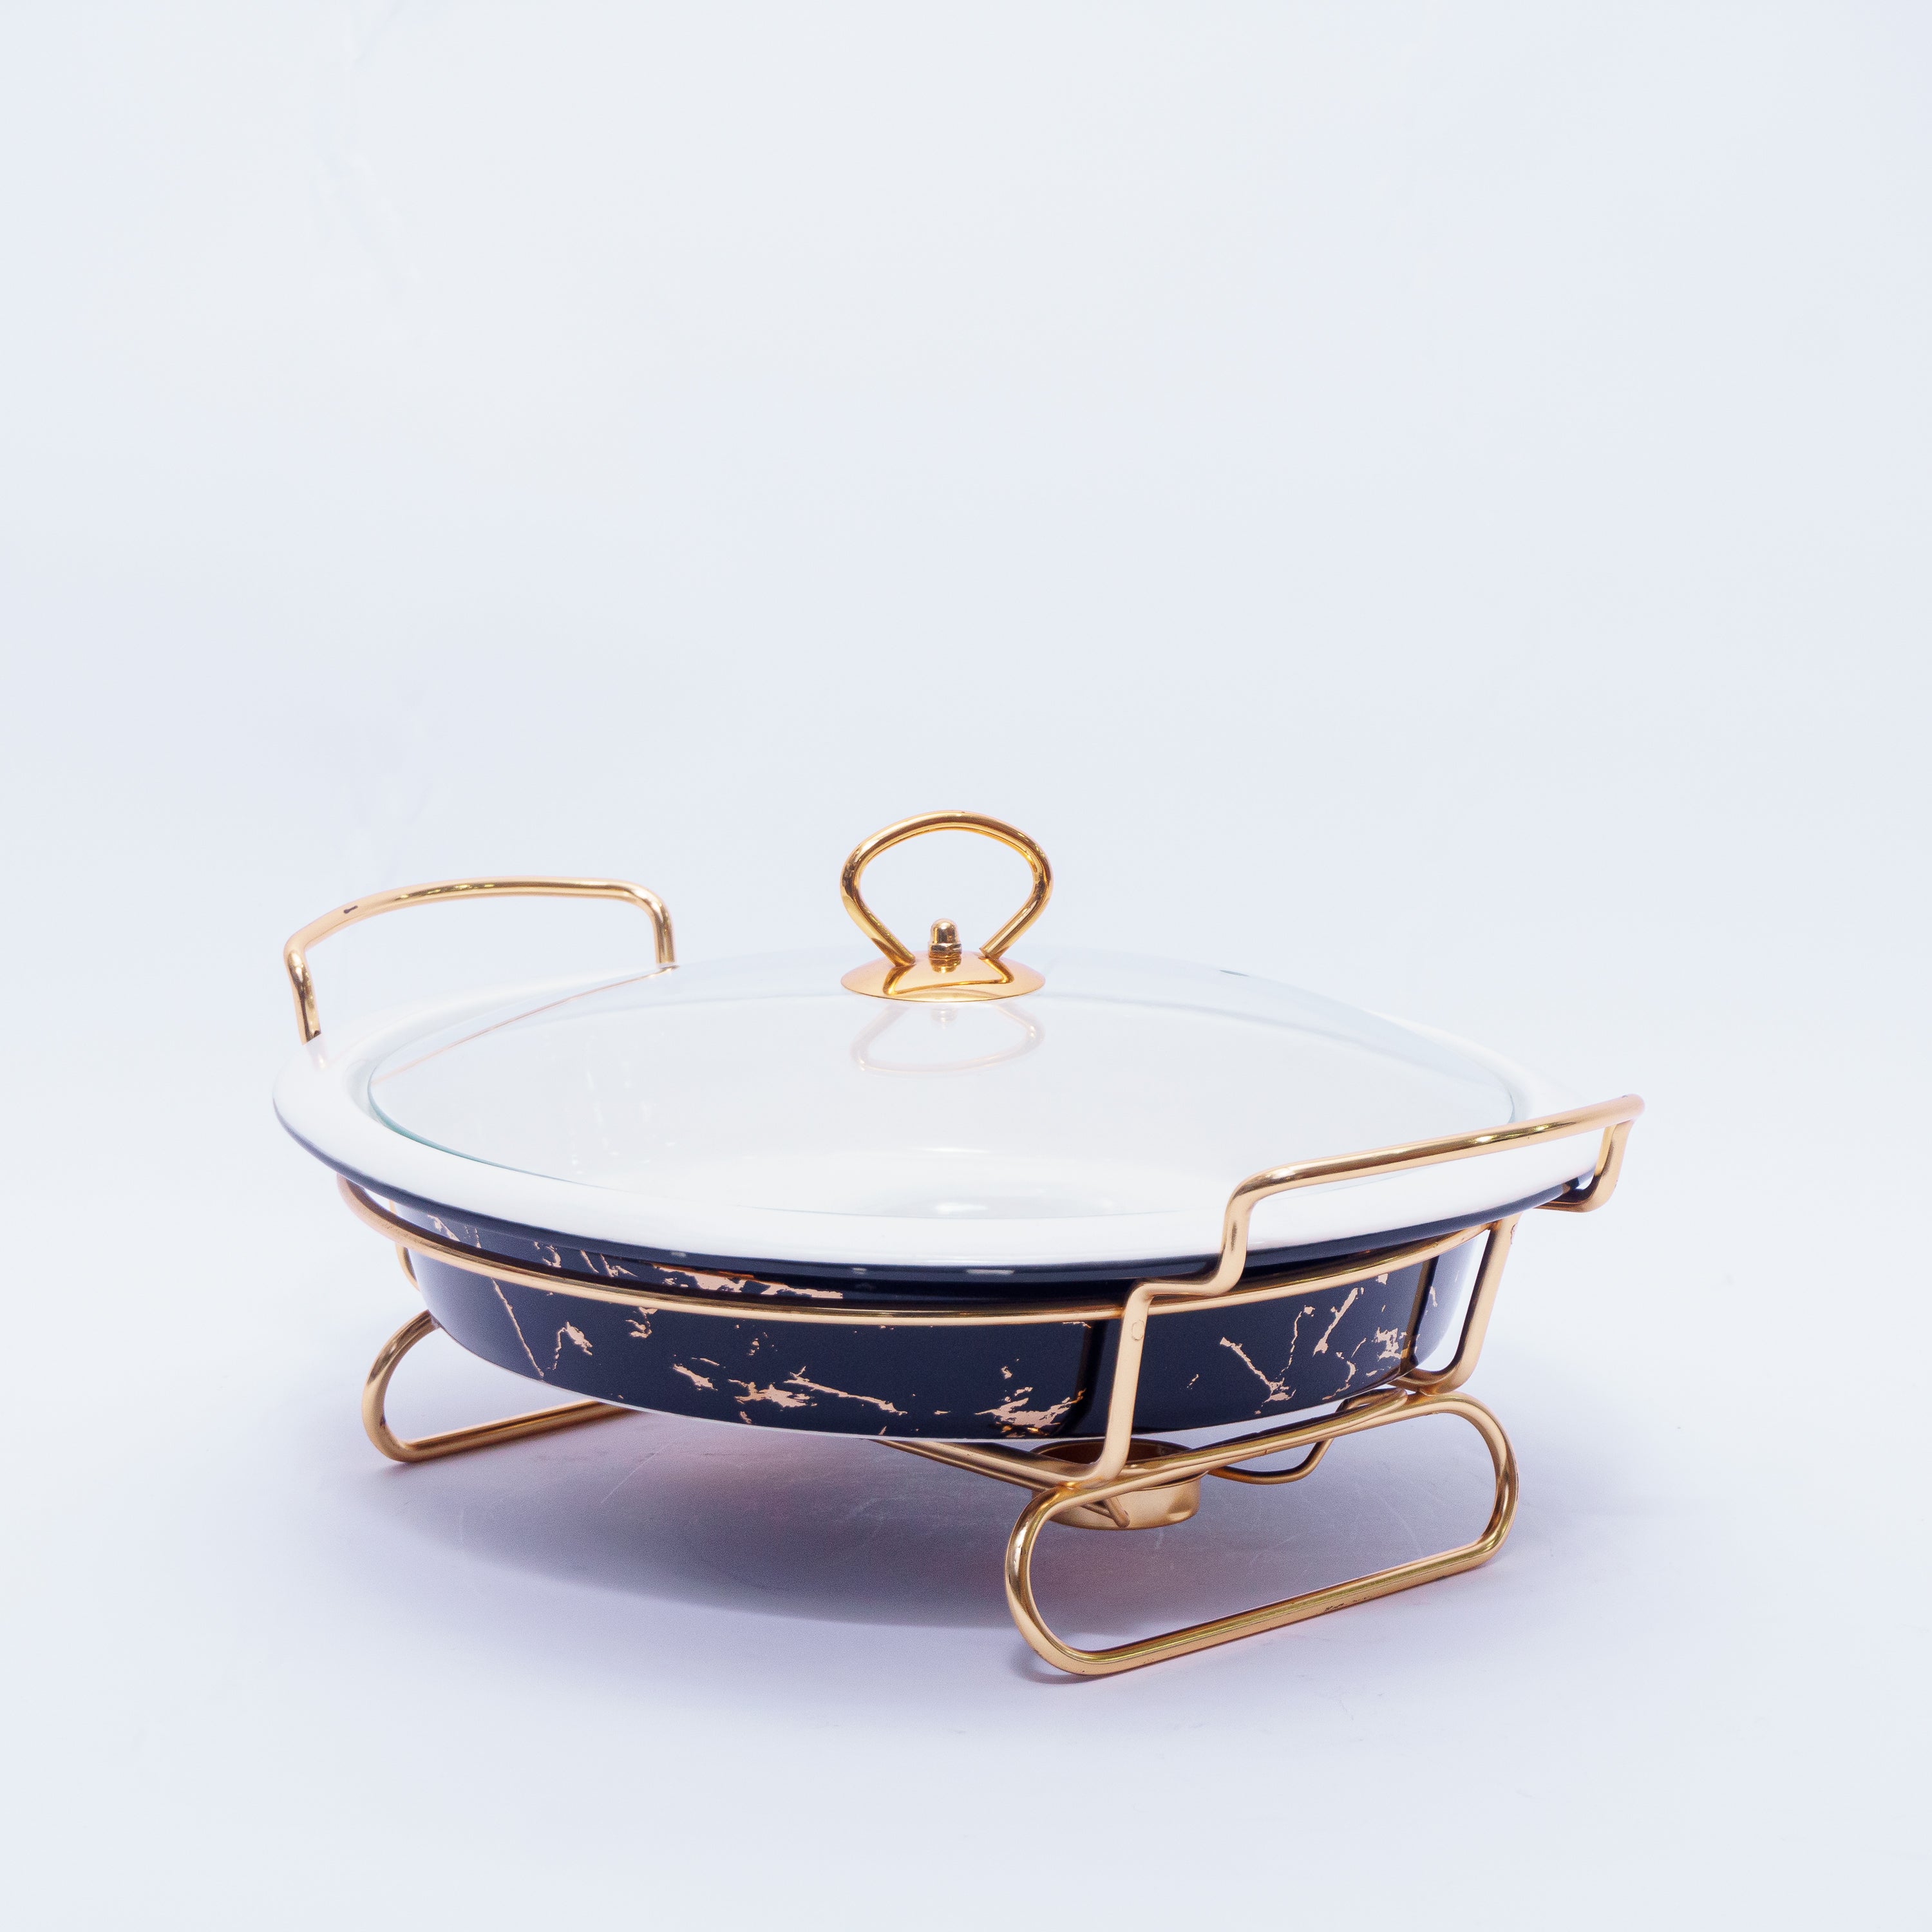 Fancy Dish Set Crafted with High-Quality Materials: Elevate Your Dining Experience